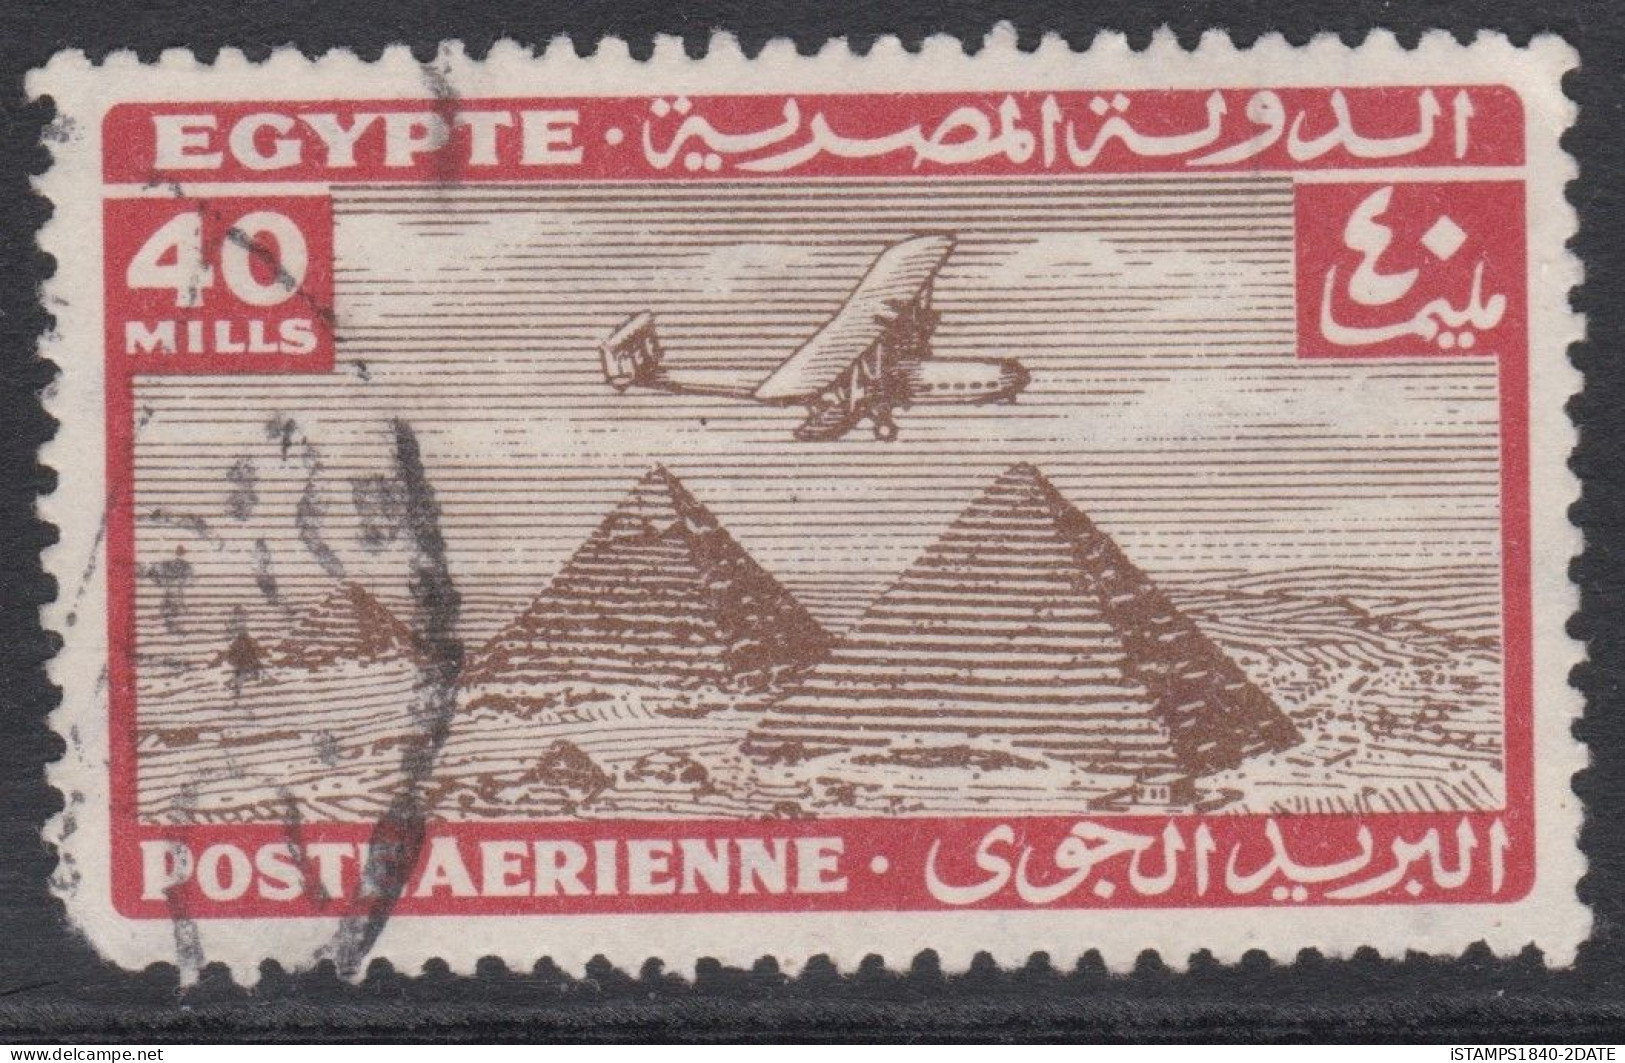 00680/ Egypt 1934/38 Air Mail 40m Used Plane Over Pyramid - Luchtpost